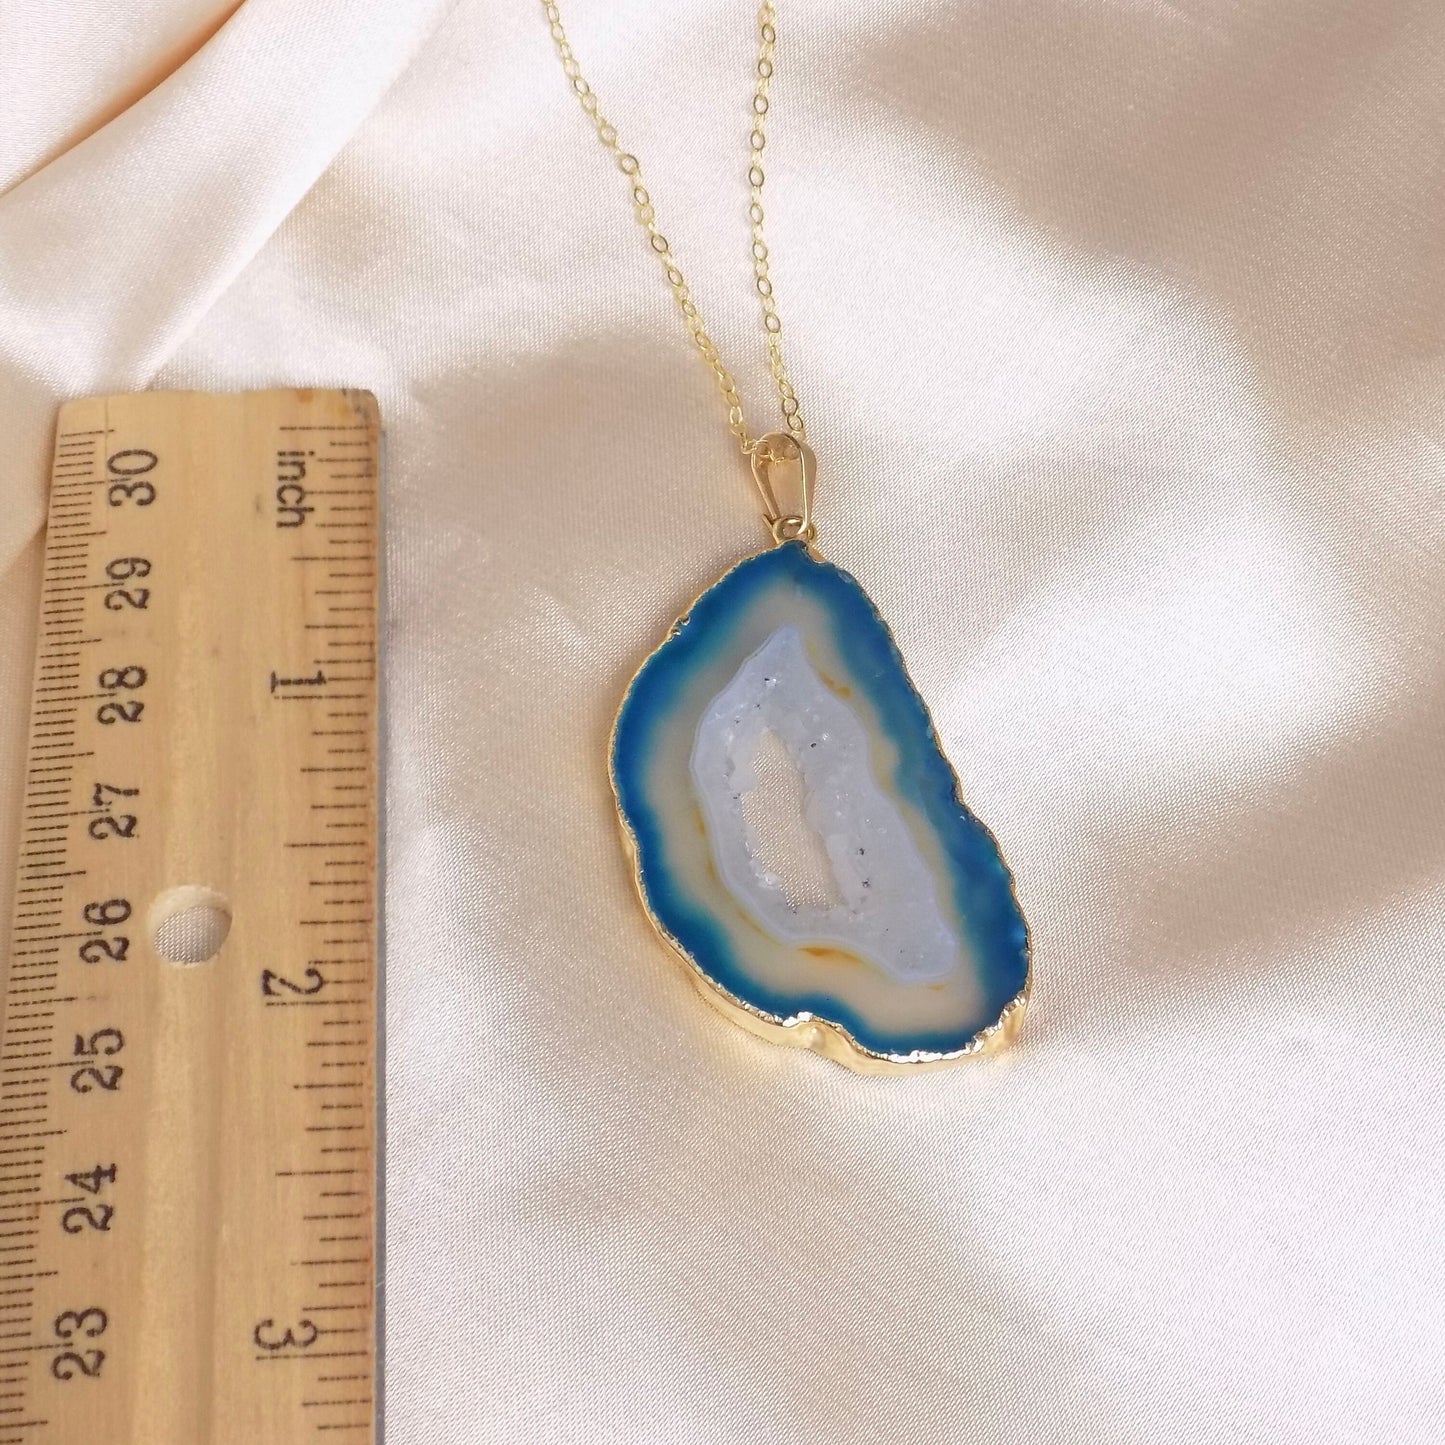 Gifts For Her, Teal Blue Statement Natural Geode Necklace Gold, Genuine Druzy, Long Agate Slice Pendant, G15-114